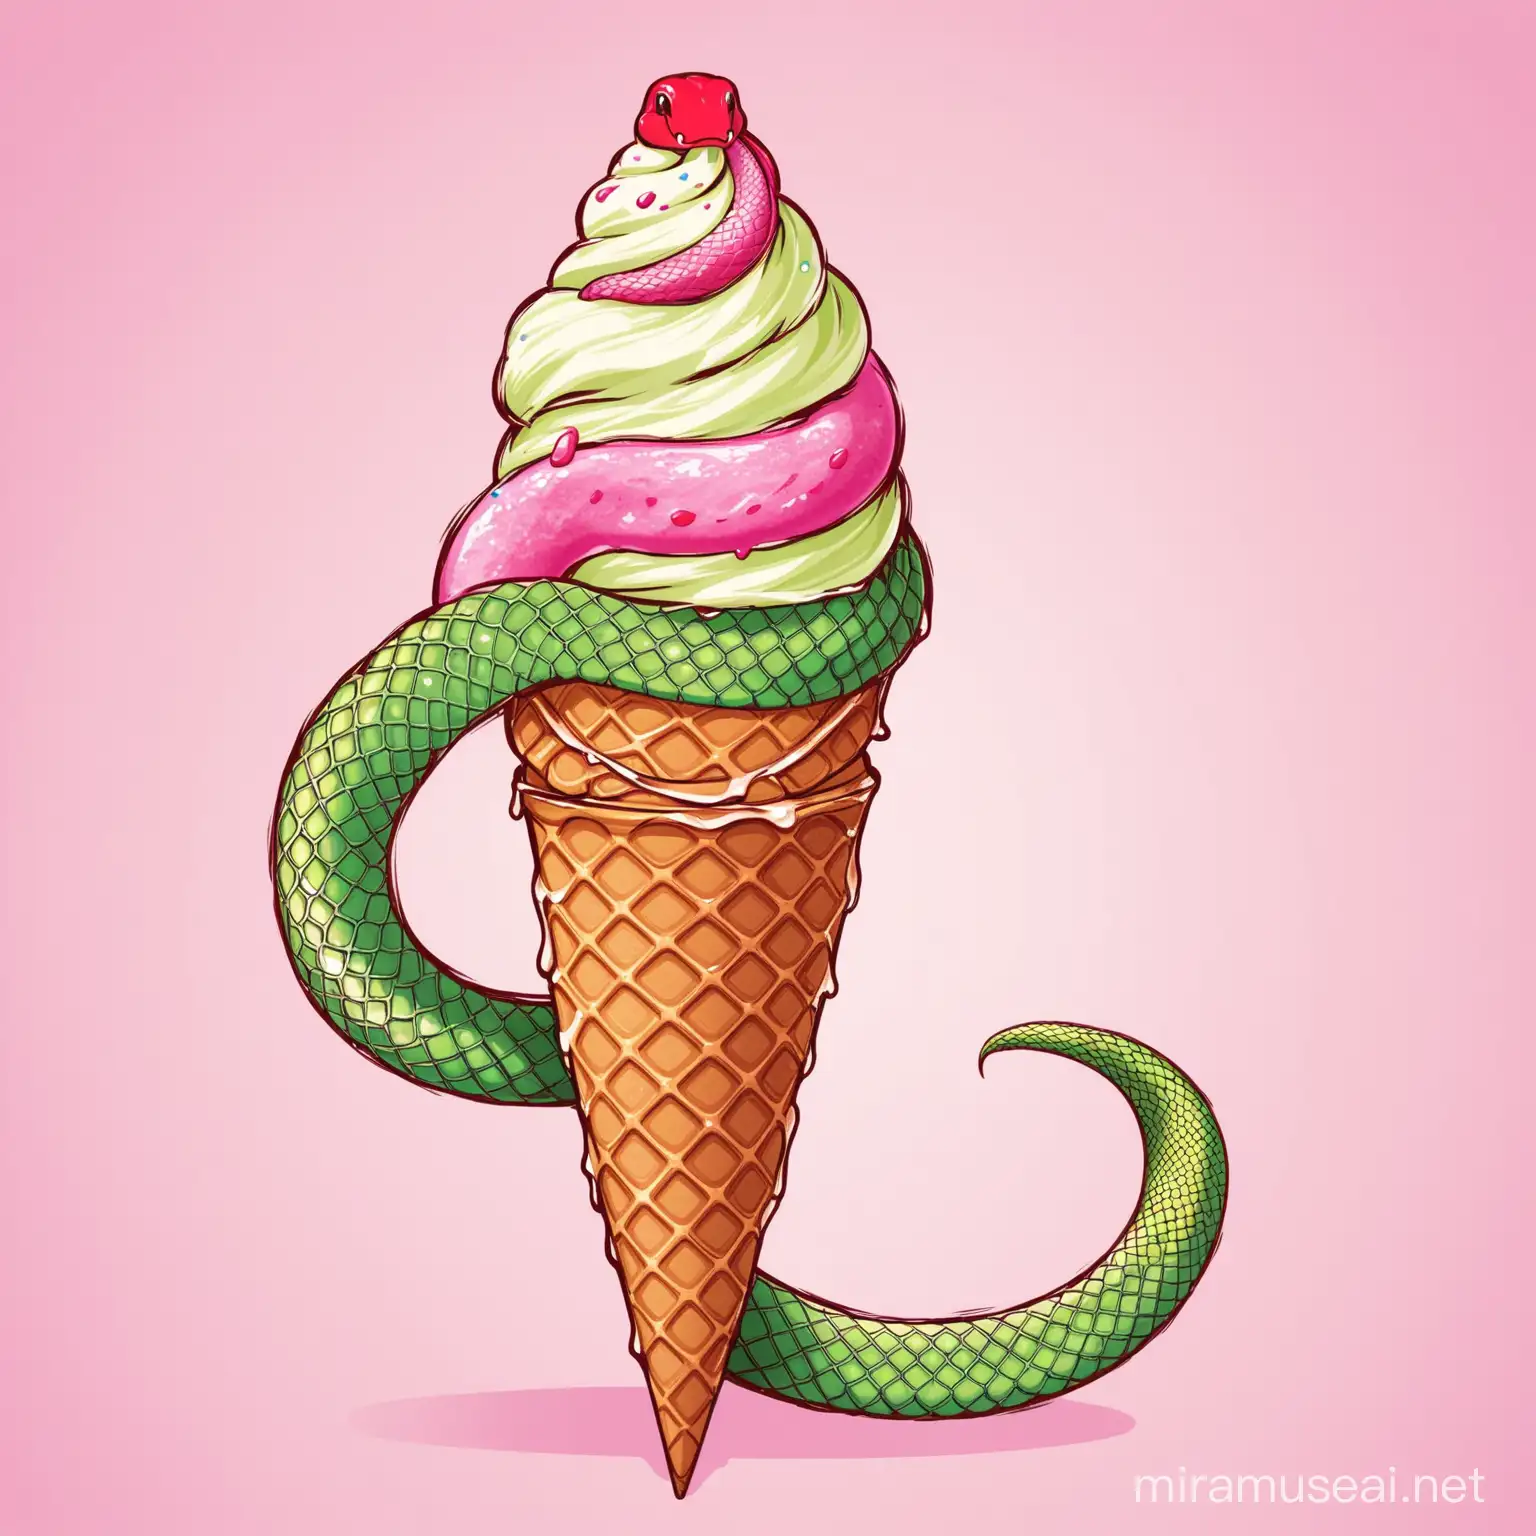 Playful Snake Pretending to be an Ice Cream Cone